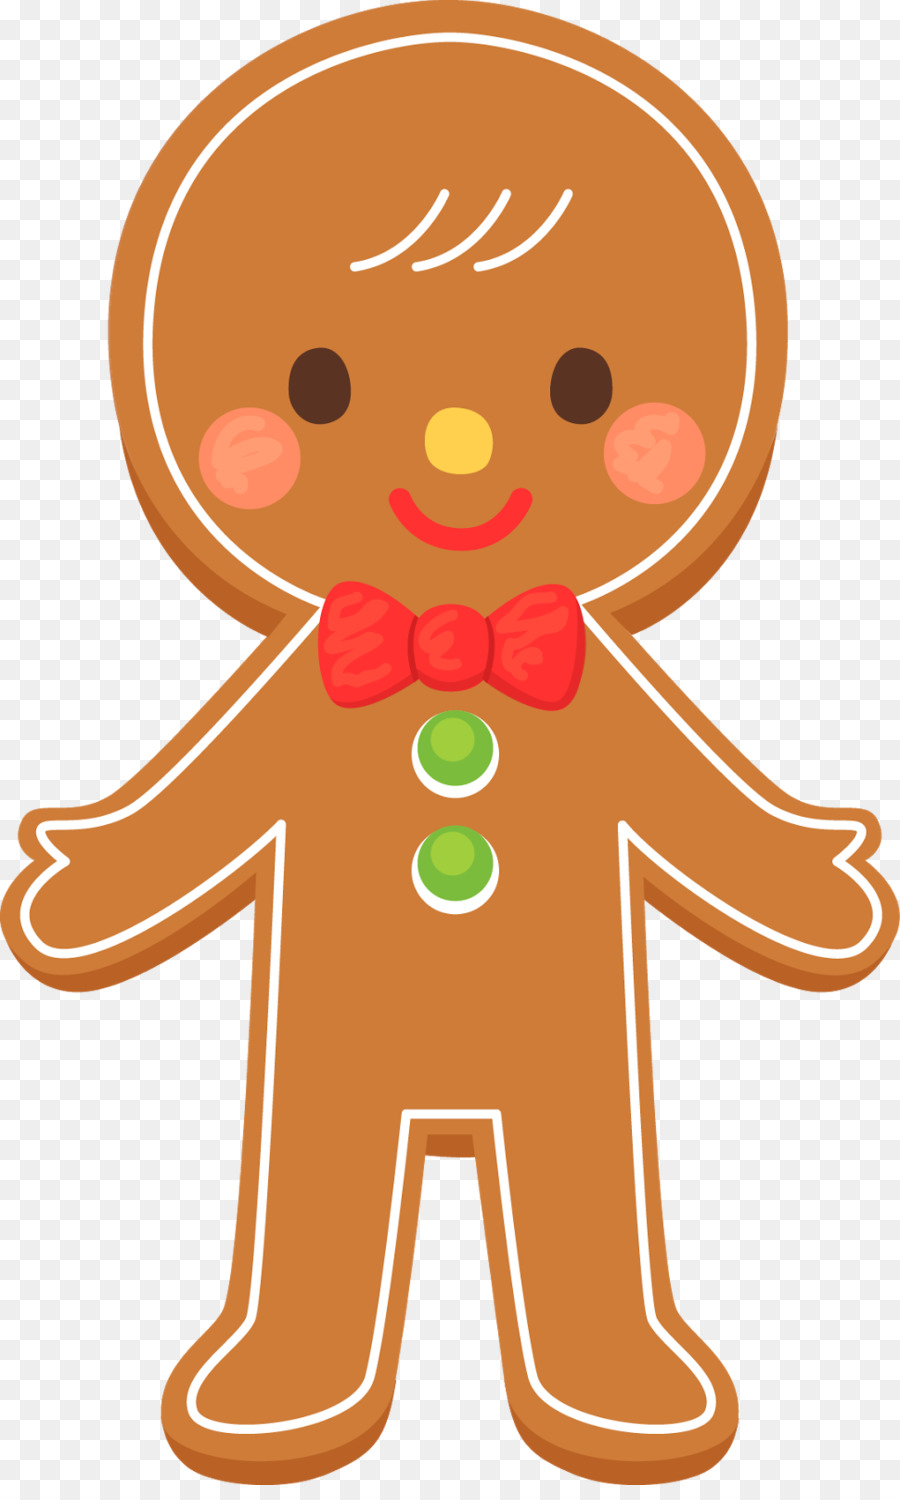 The Gingerbread Man Biscuit Clip art - Transparent Gingerbread Cliparts png download - 970*1600 - Free Transparent Gingerbread Man png Download.